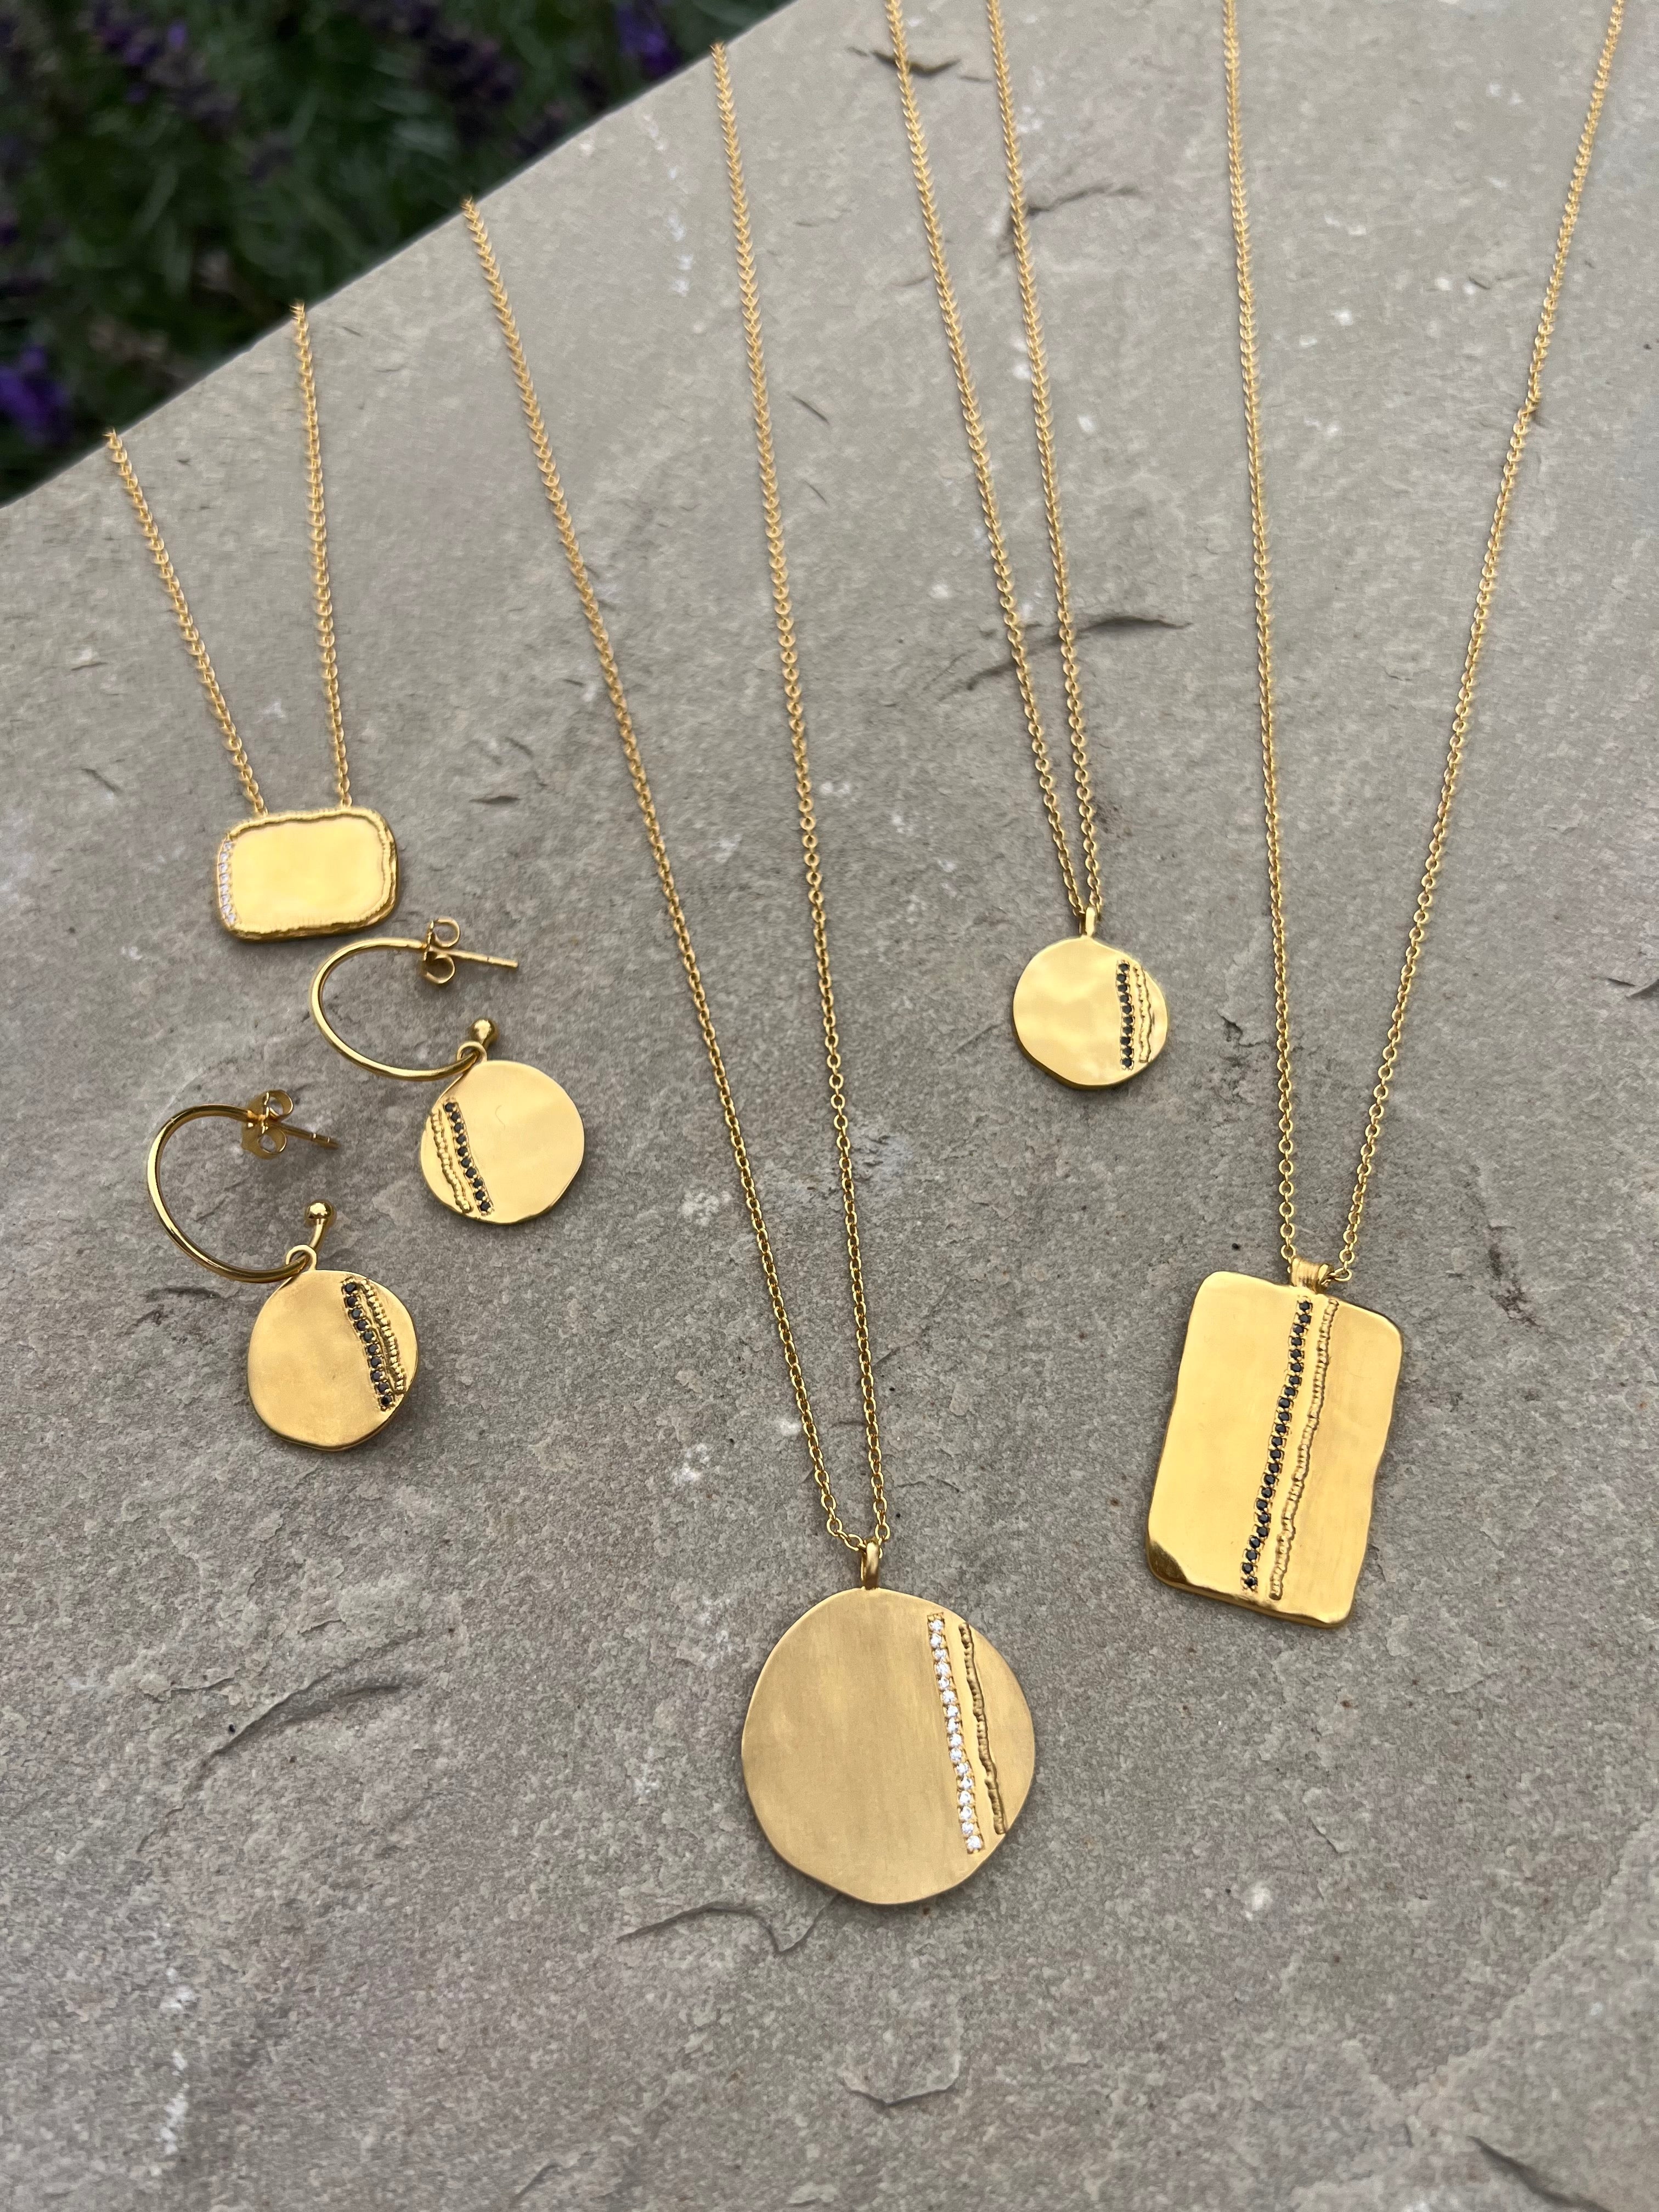 louise hendricks jewellery new collection pendant necklaces and earrings 